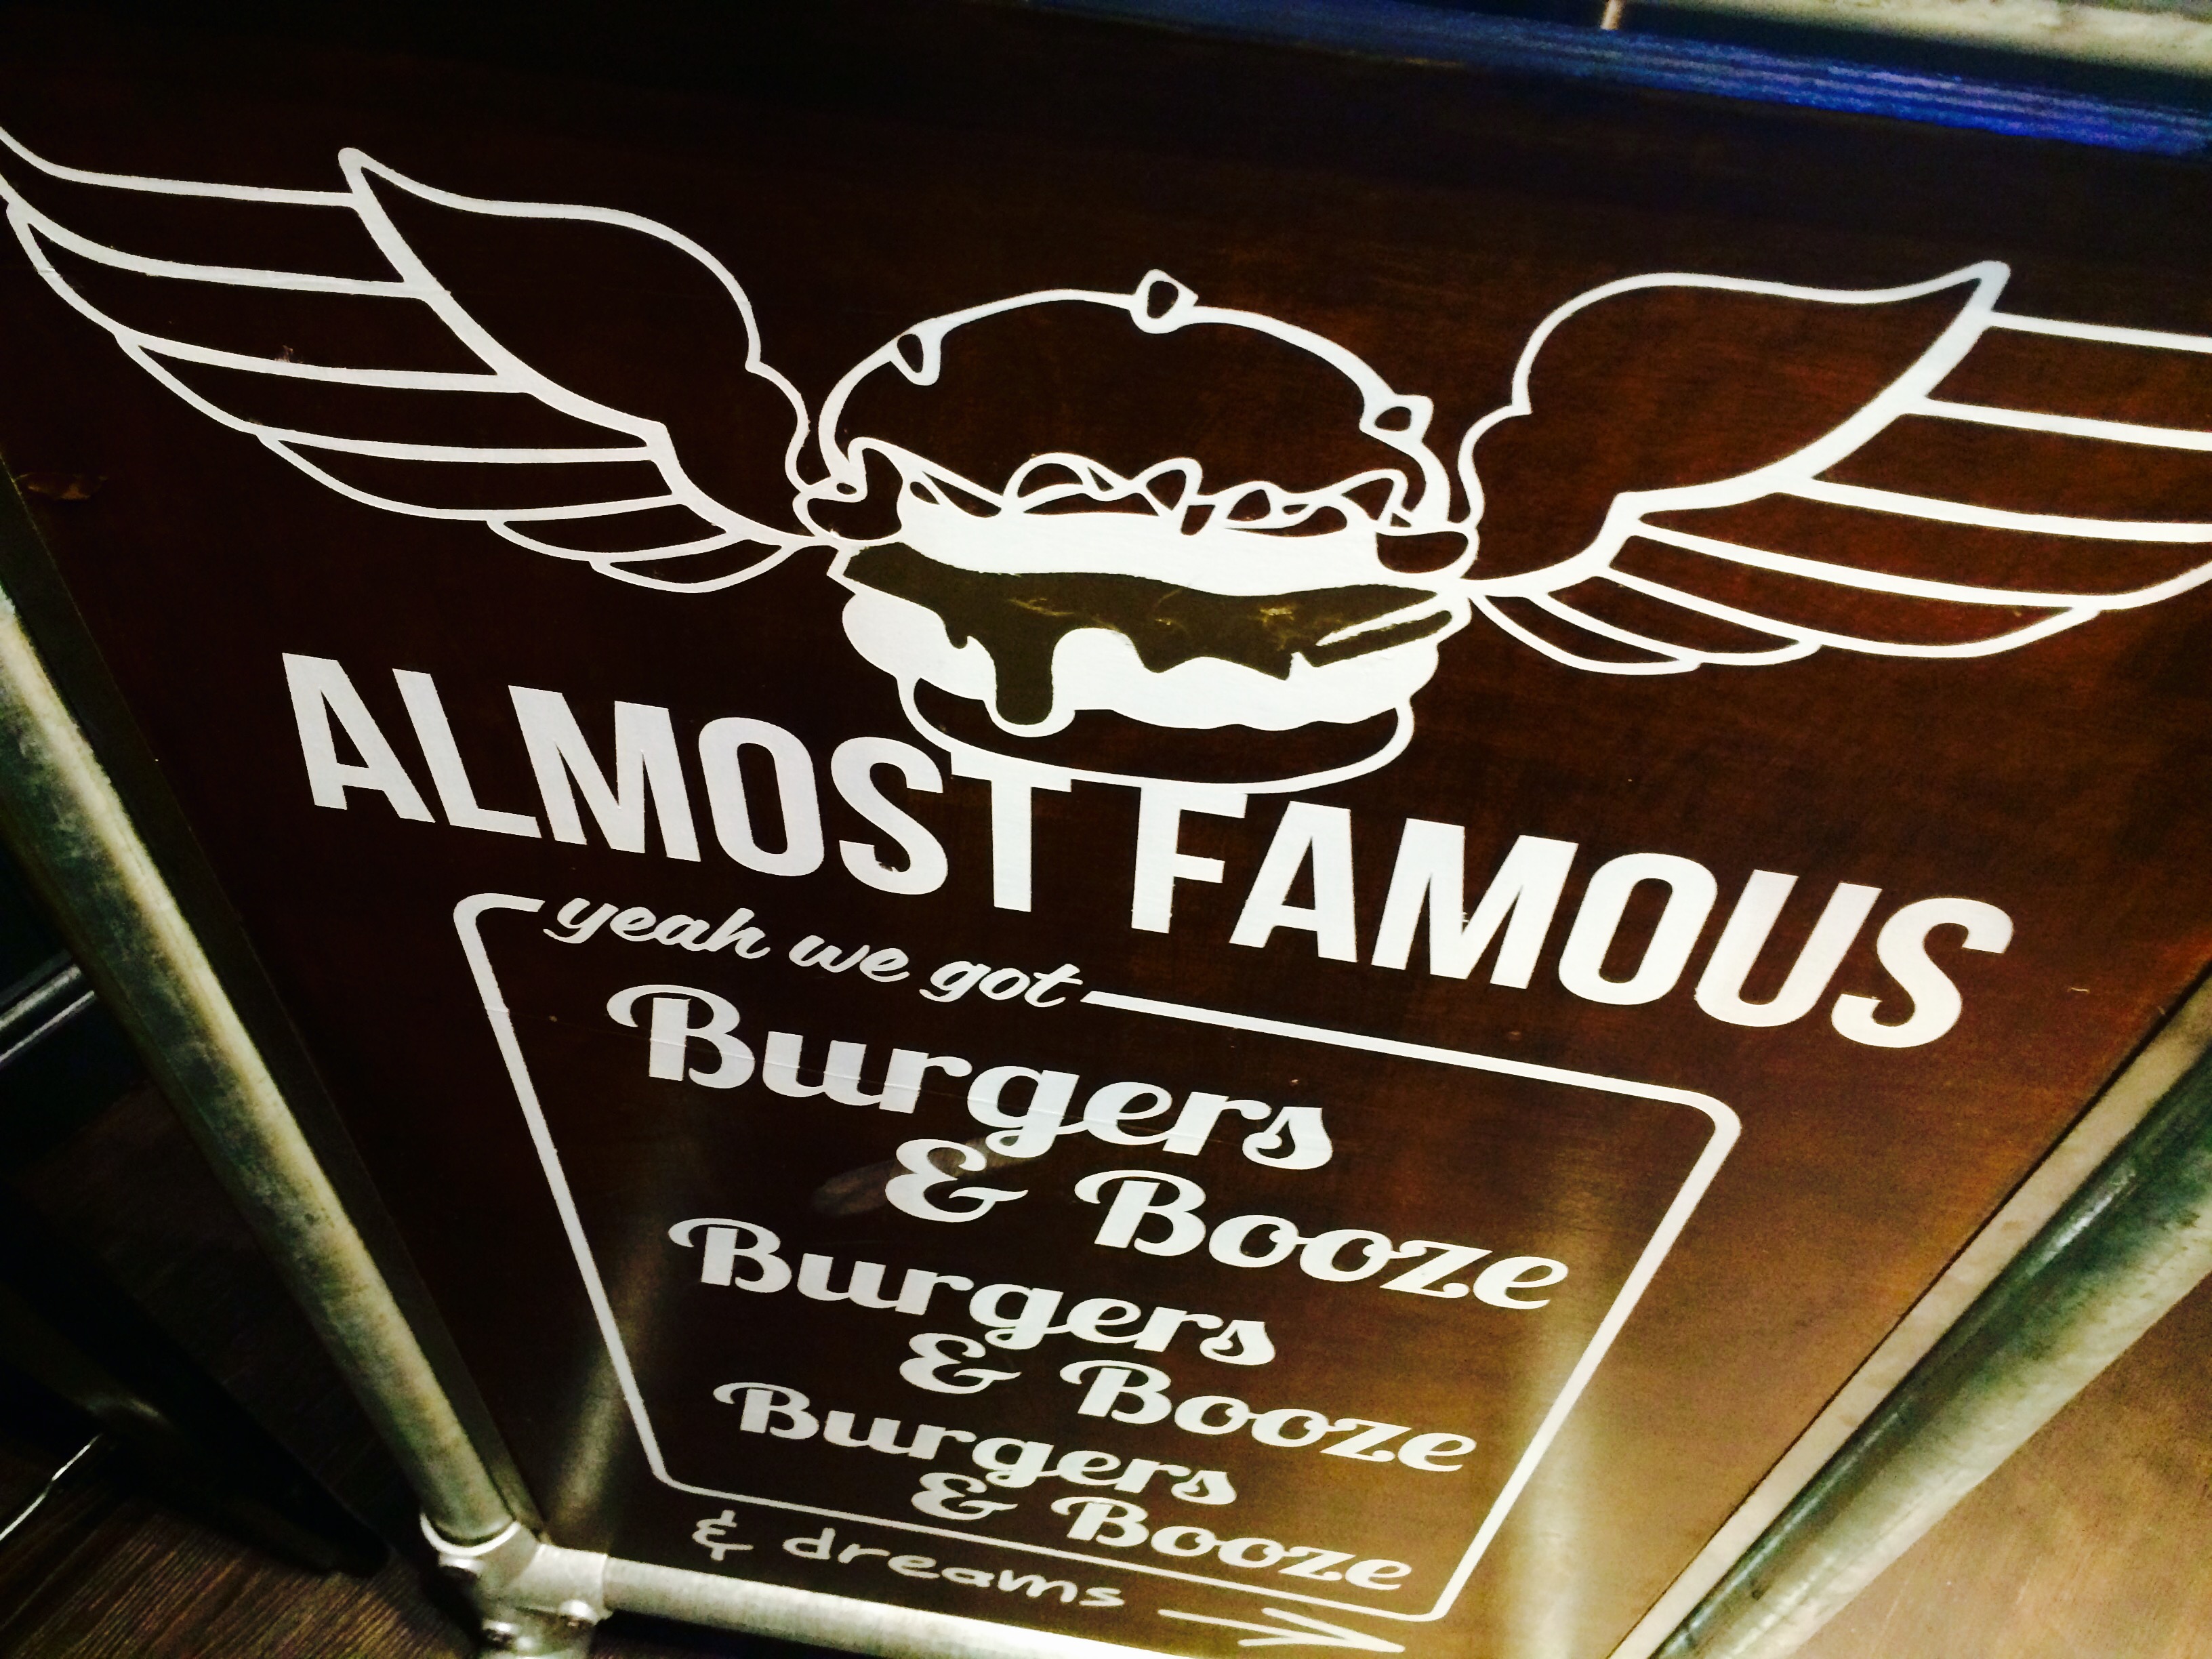 Dirty food porn: Almost Famous unleash daring new menu | Rant and Rave